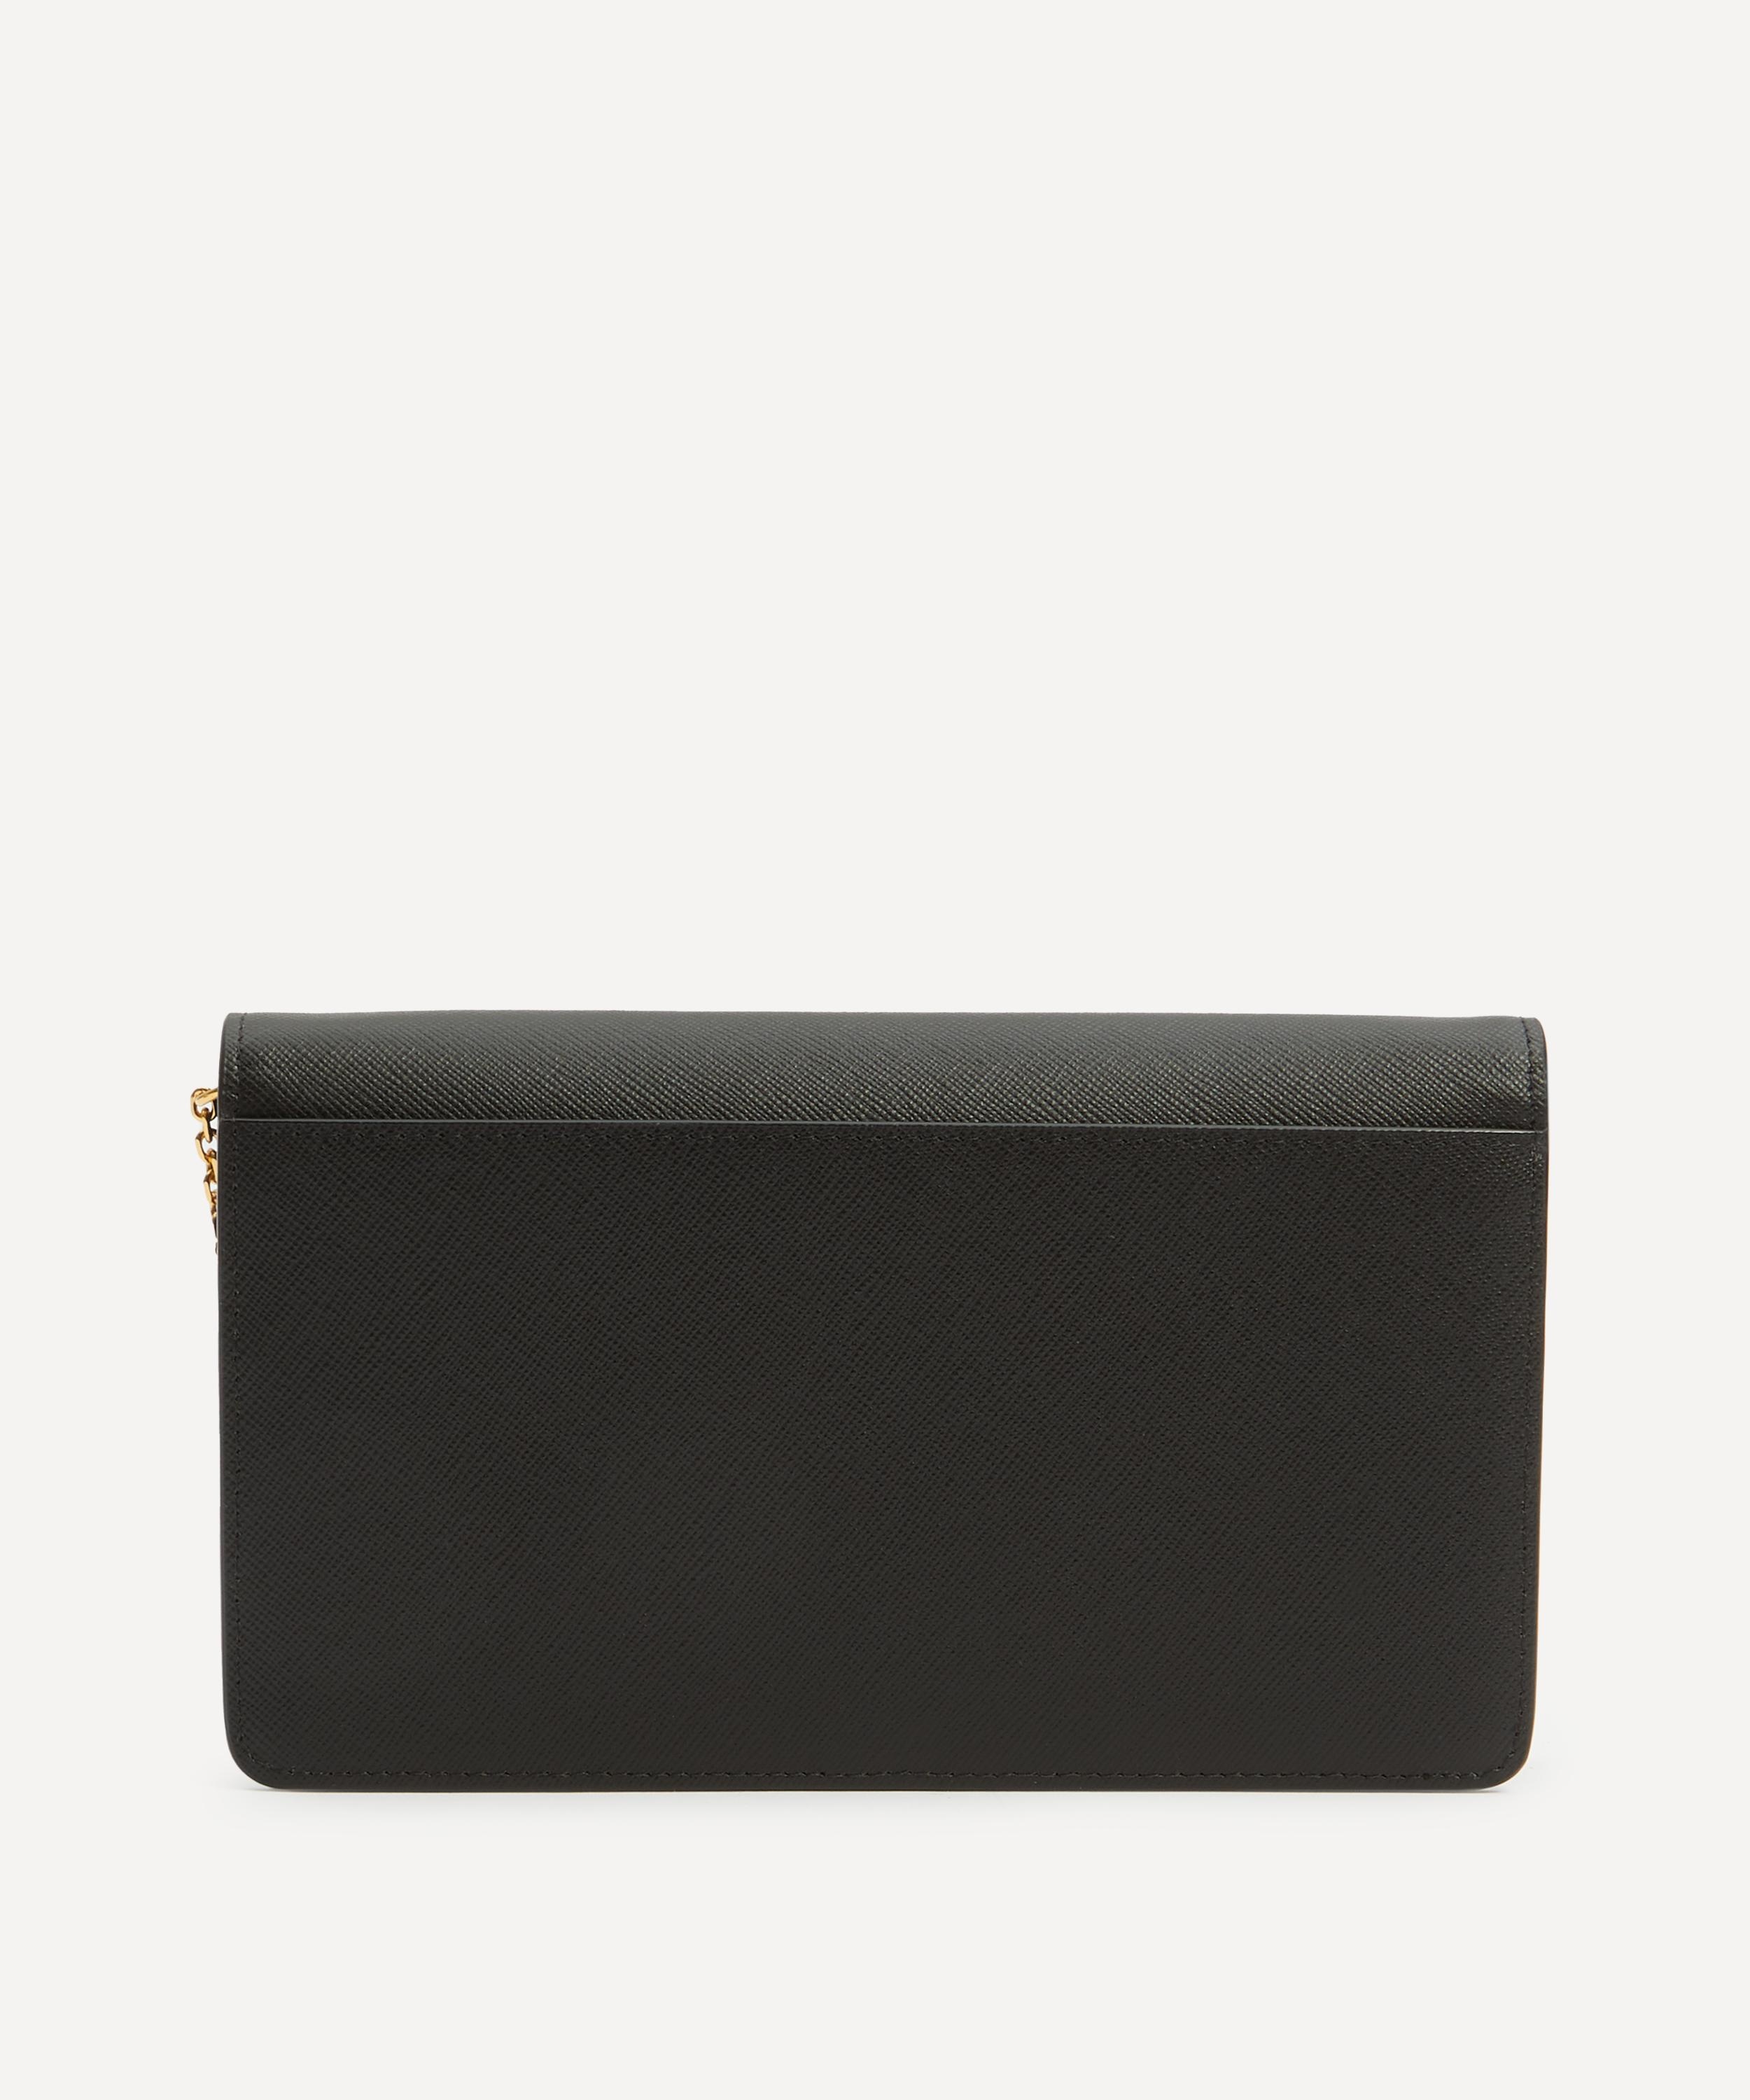 Long Black Leather Chain Wallet - 3